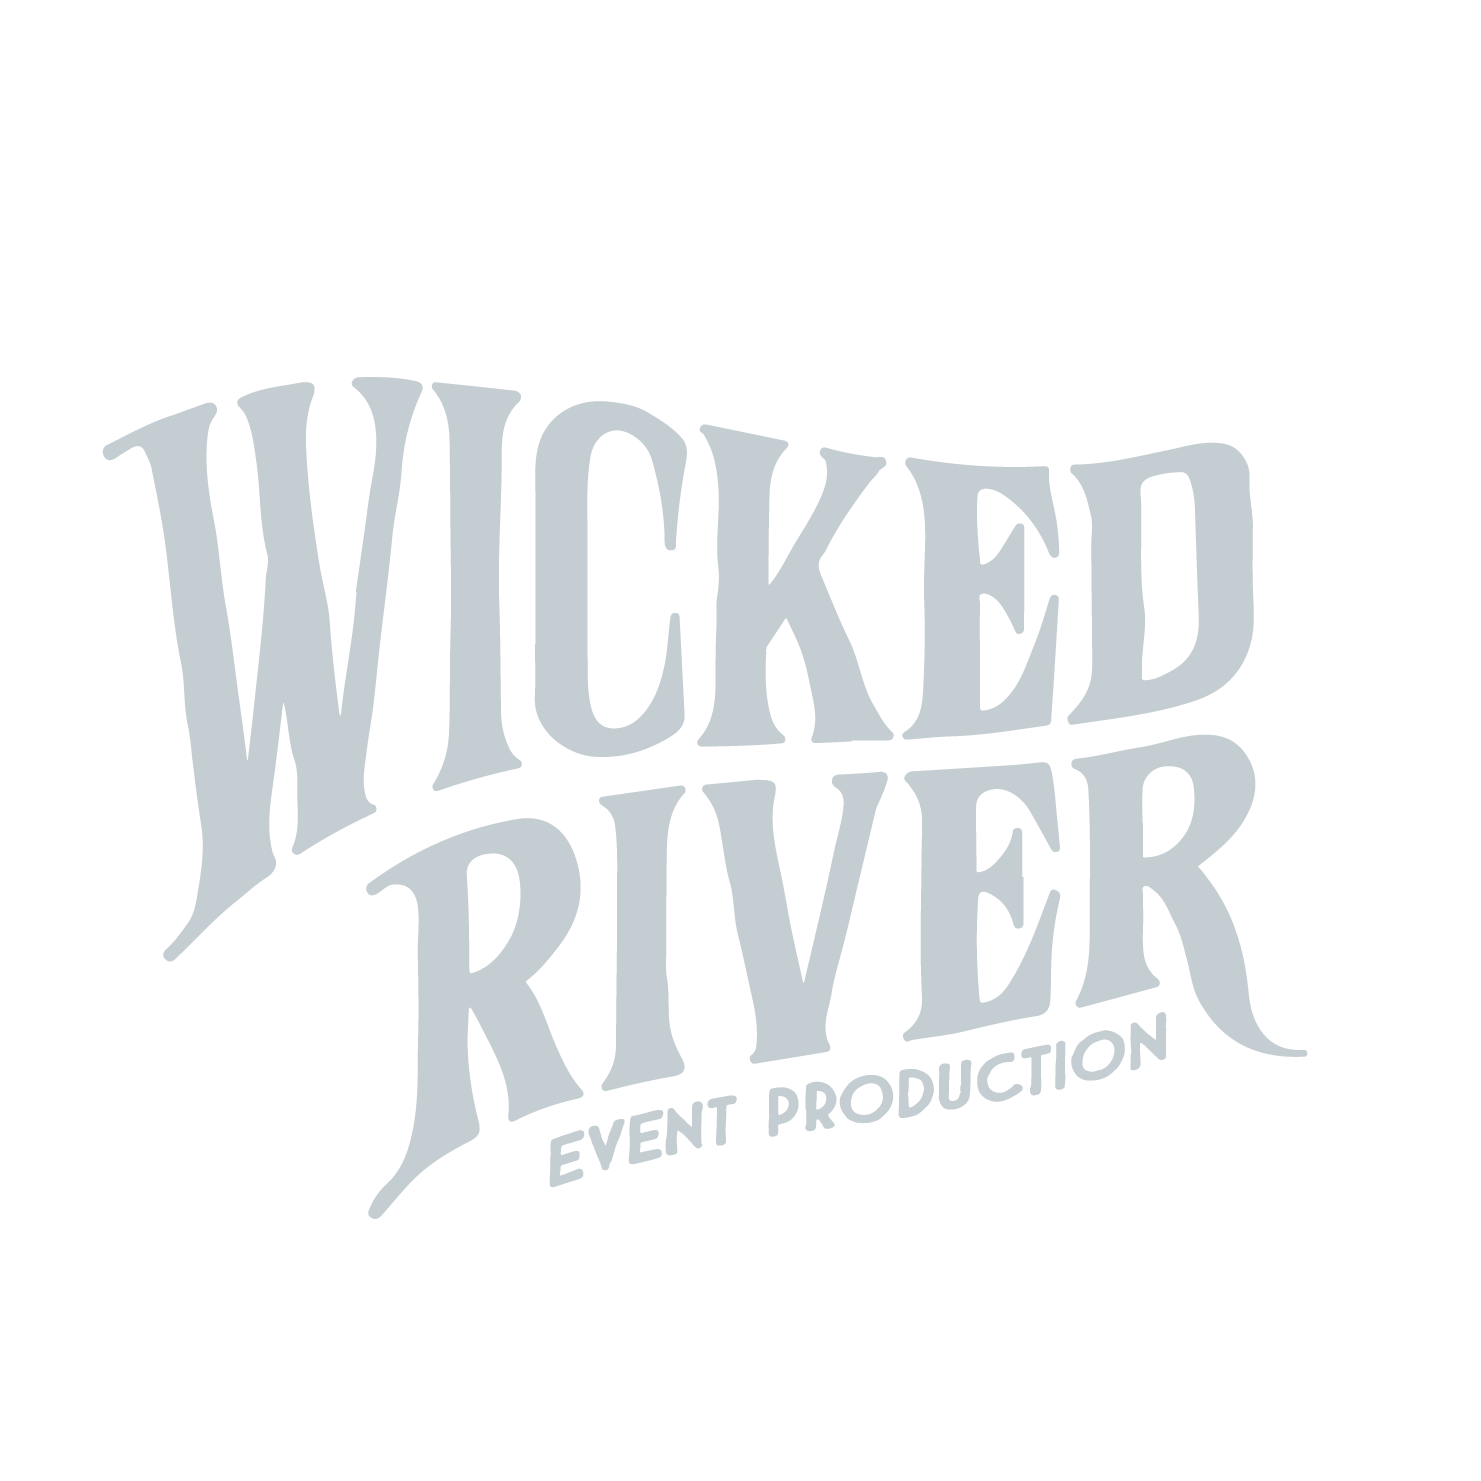 Wicked River Event Production | Dubuque, Iowa Weddings and Events